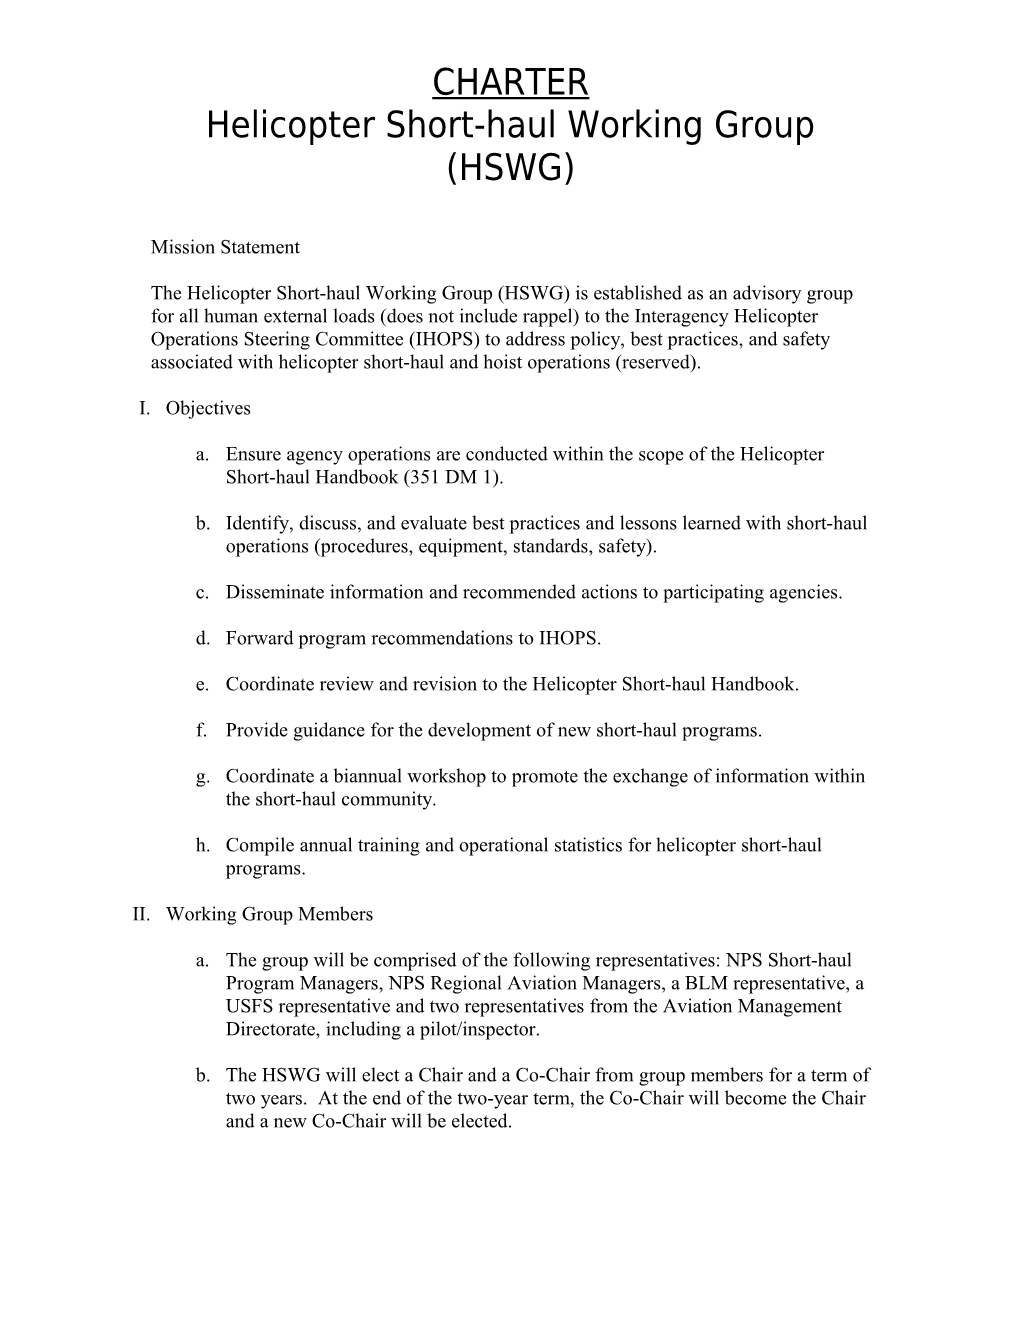 Helicopter Short-Haul Working Group (HSWG)